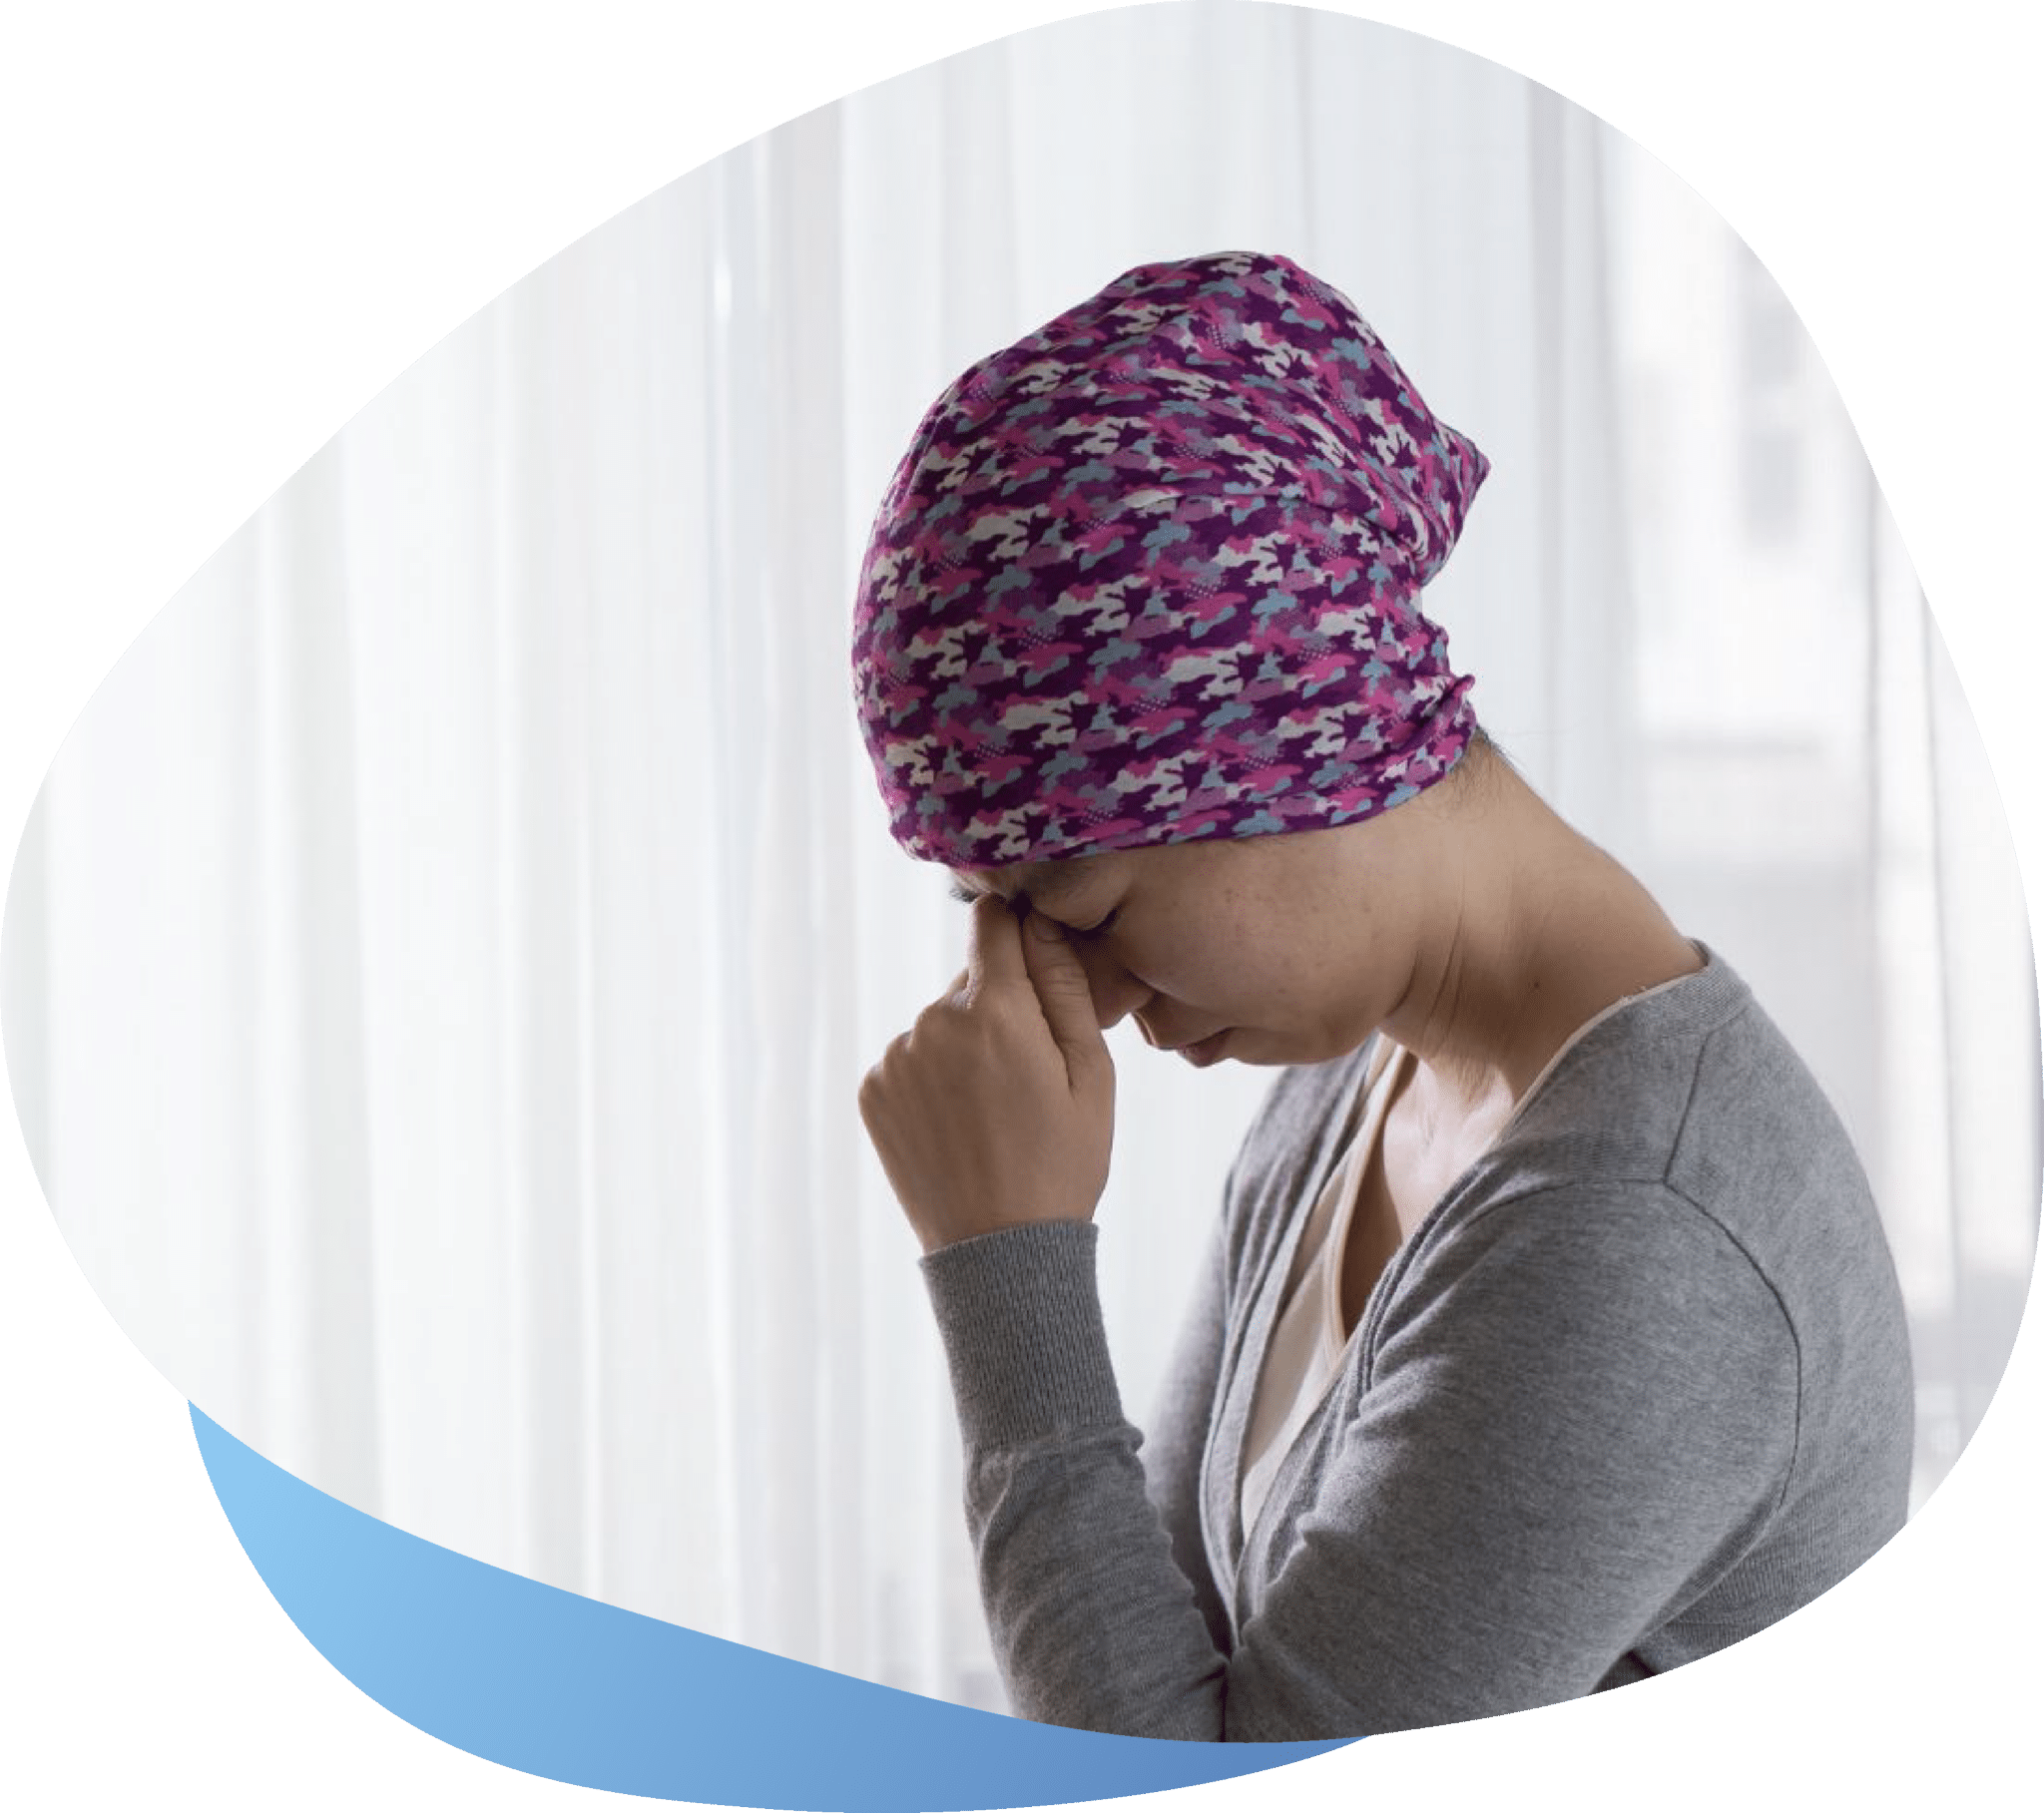 Cancer Pain Management In Indiana